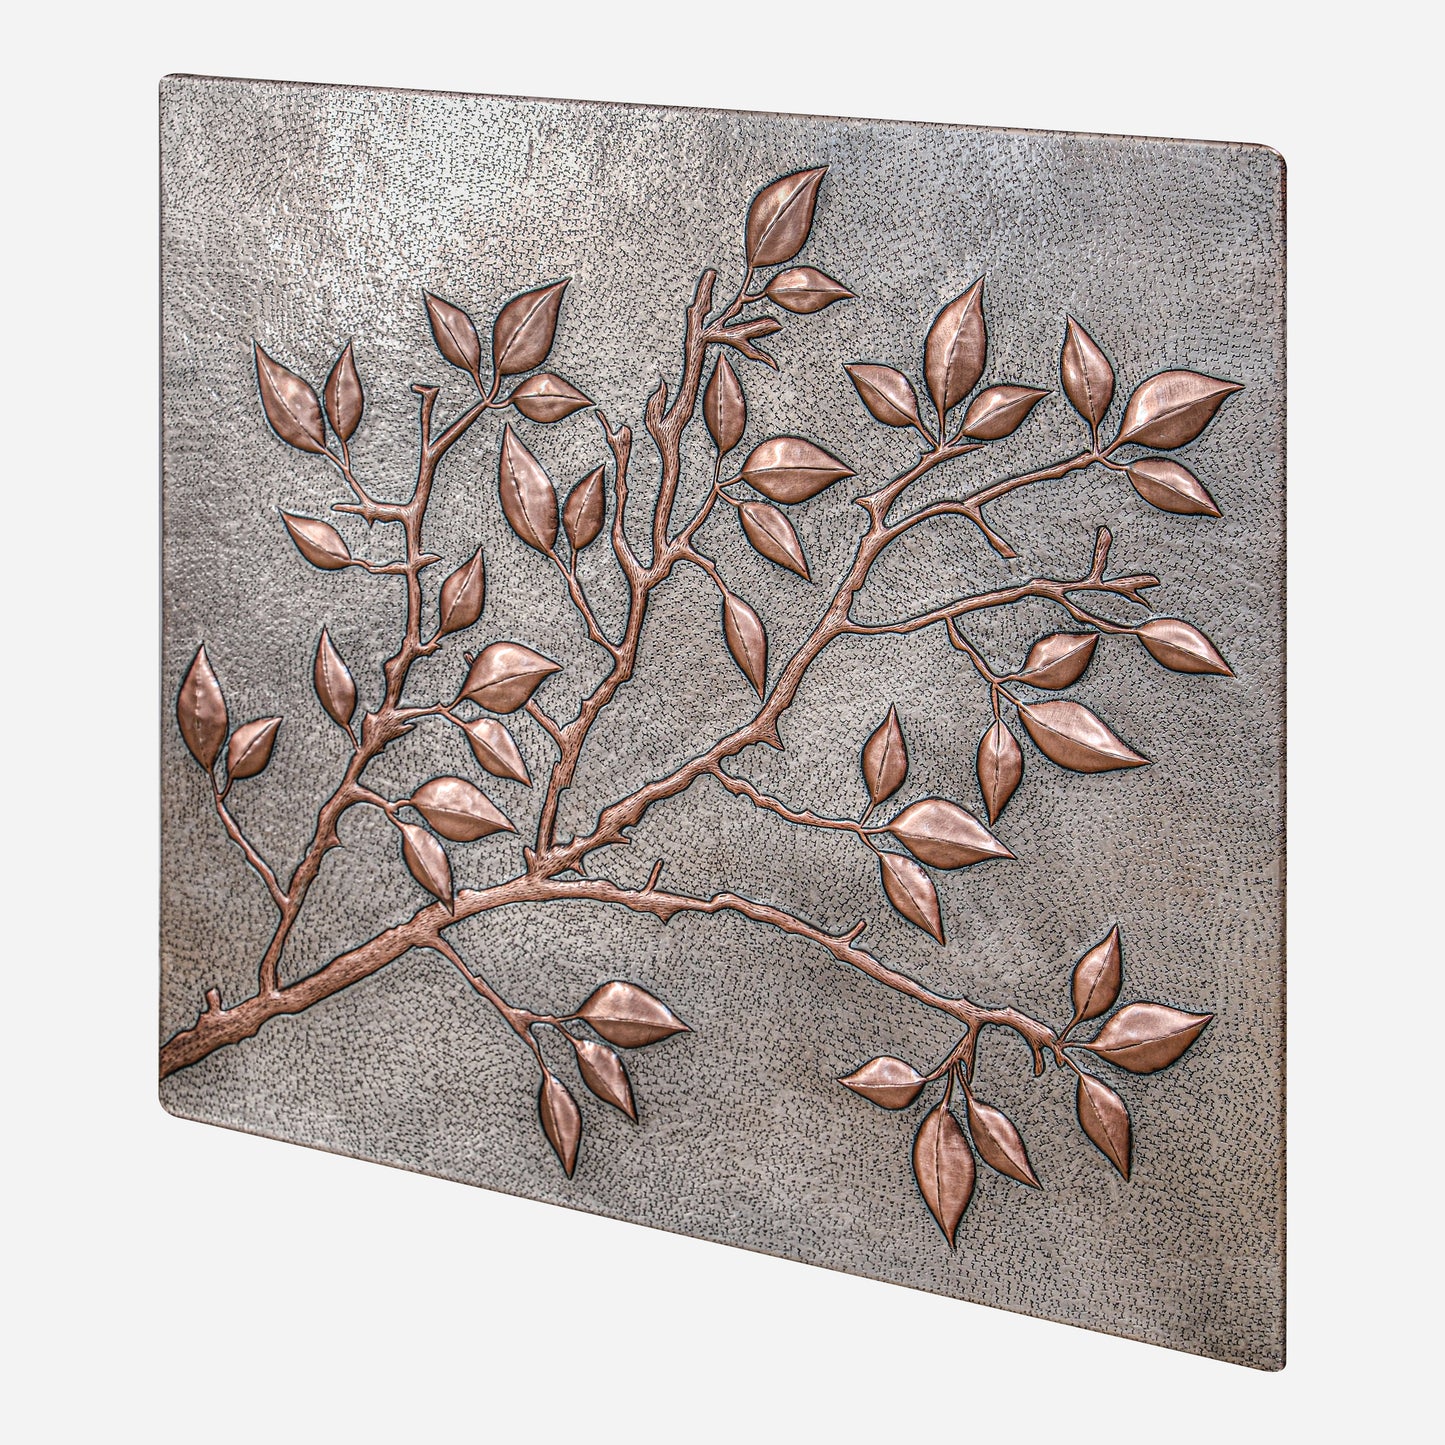 Copper Backsplash (Tree Branches and Leaves, Silver&Copper Color)